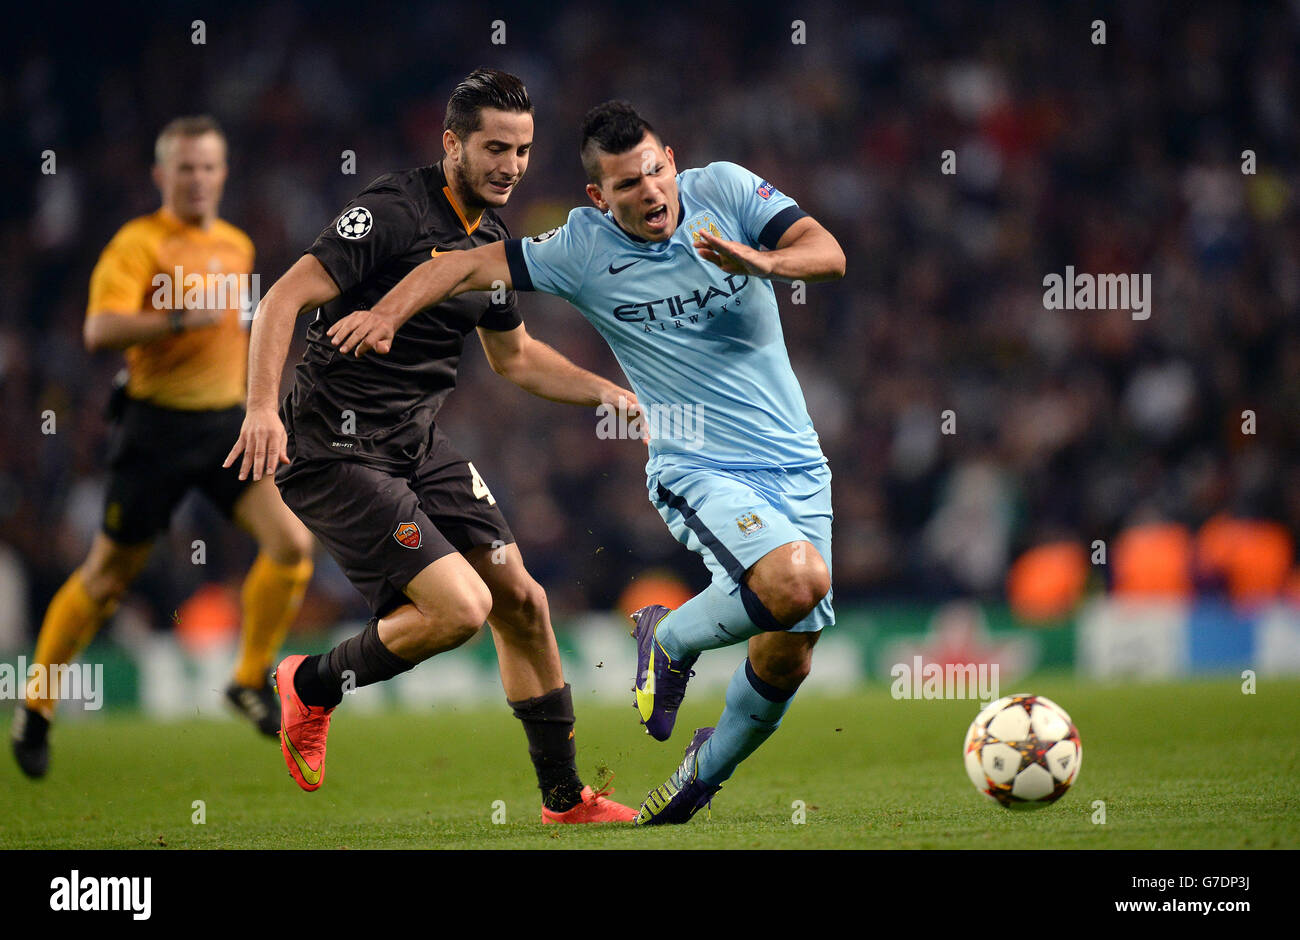 Roma's Kostas Manolas and Manchester City's Sergio Aguero (right) during the UEFA Champions League match at the Etihad Stadium, Manchester. PRESS ASSOCIATION Photo. Picture date: Tuesday September 30, 2014, See PA story SOCCER Man City. Photo credit should read: Martin Rickett/PA Wire. Stock Photo